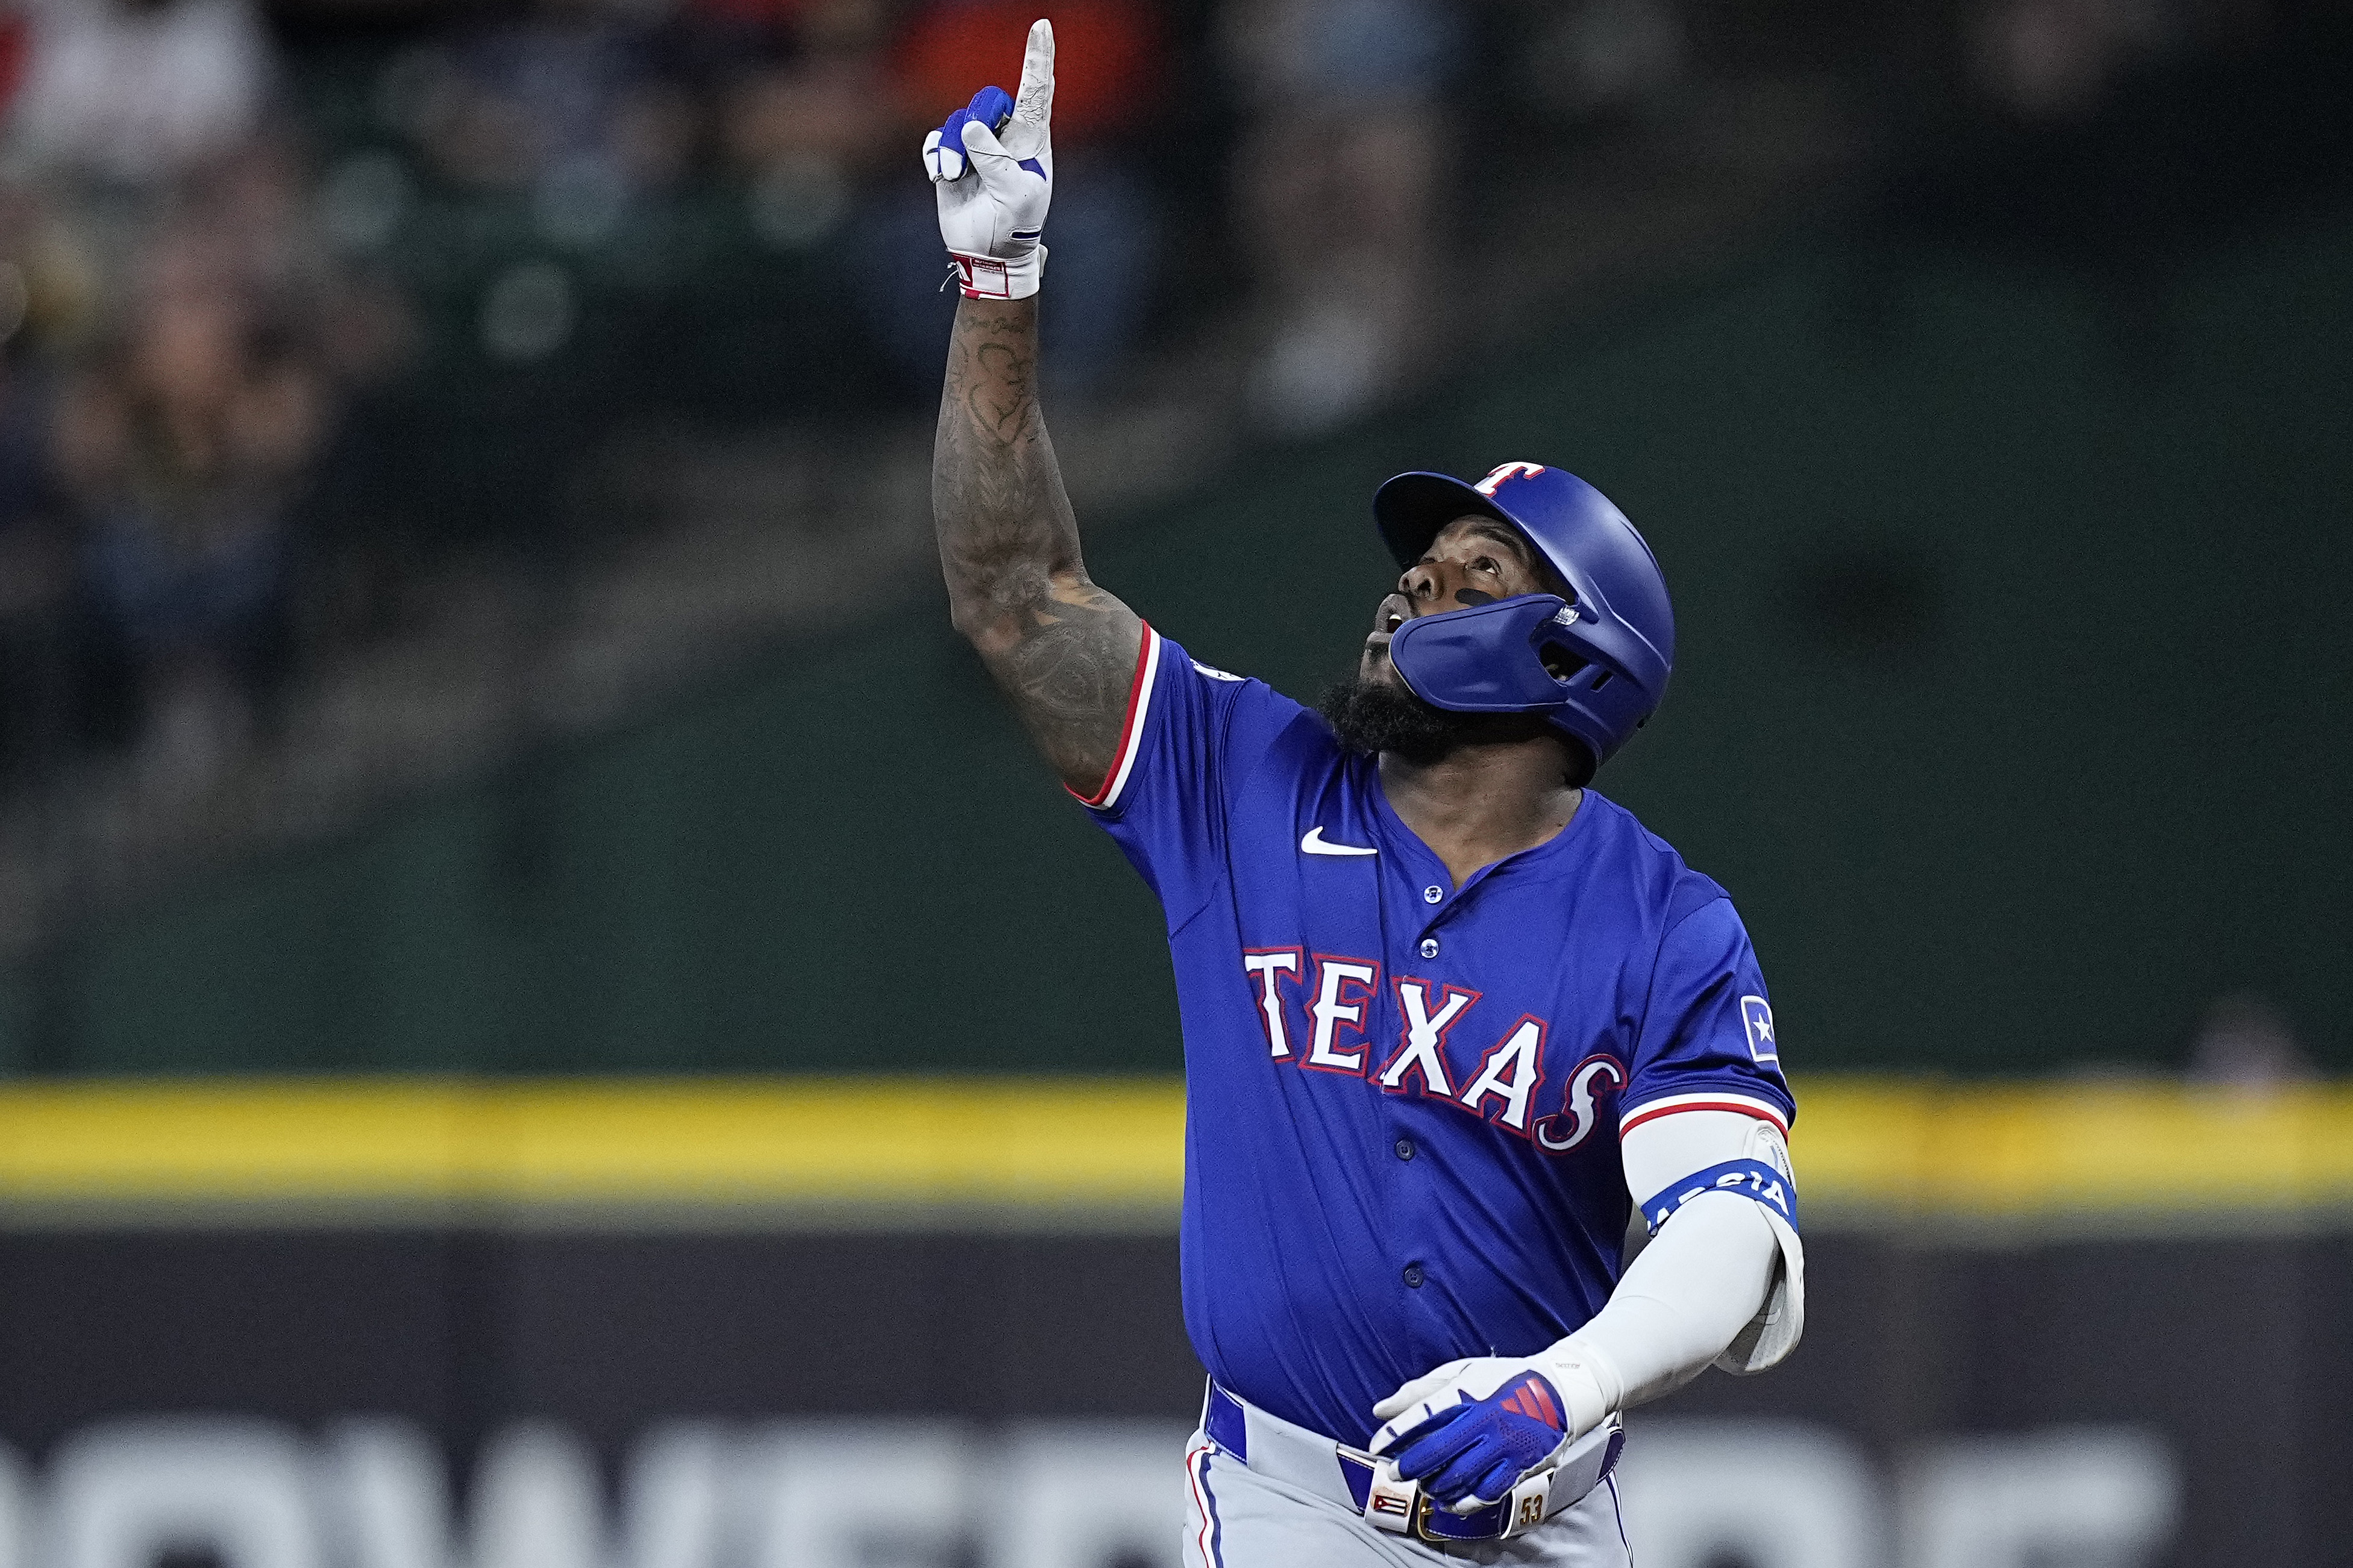 heim homers with 4 rbis as rangers win 12-8 and drop astros to to 4-11